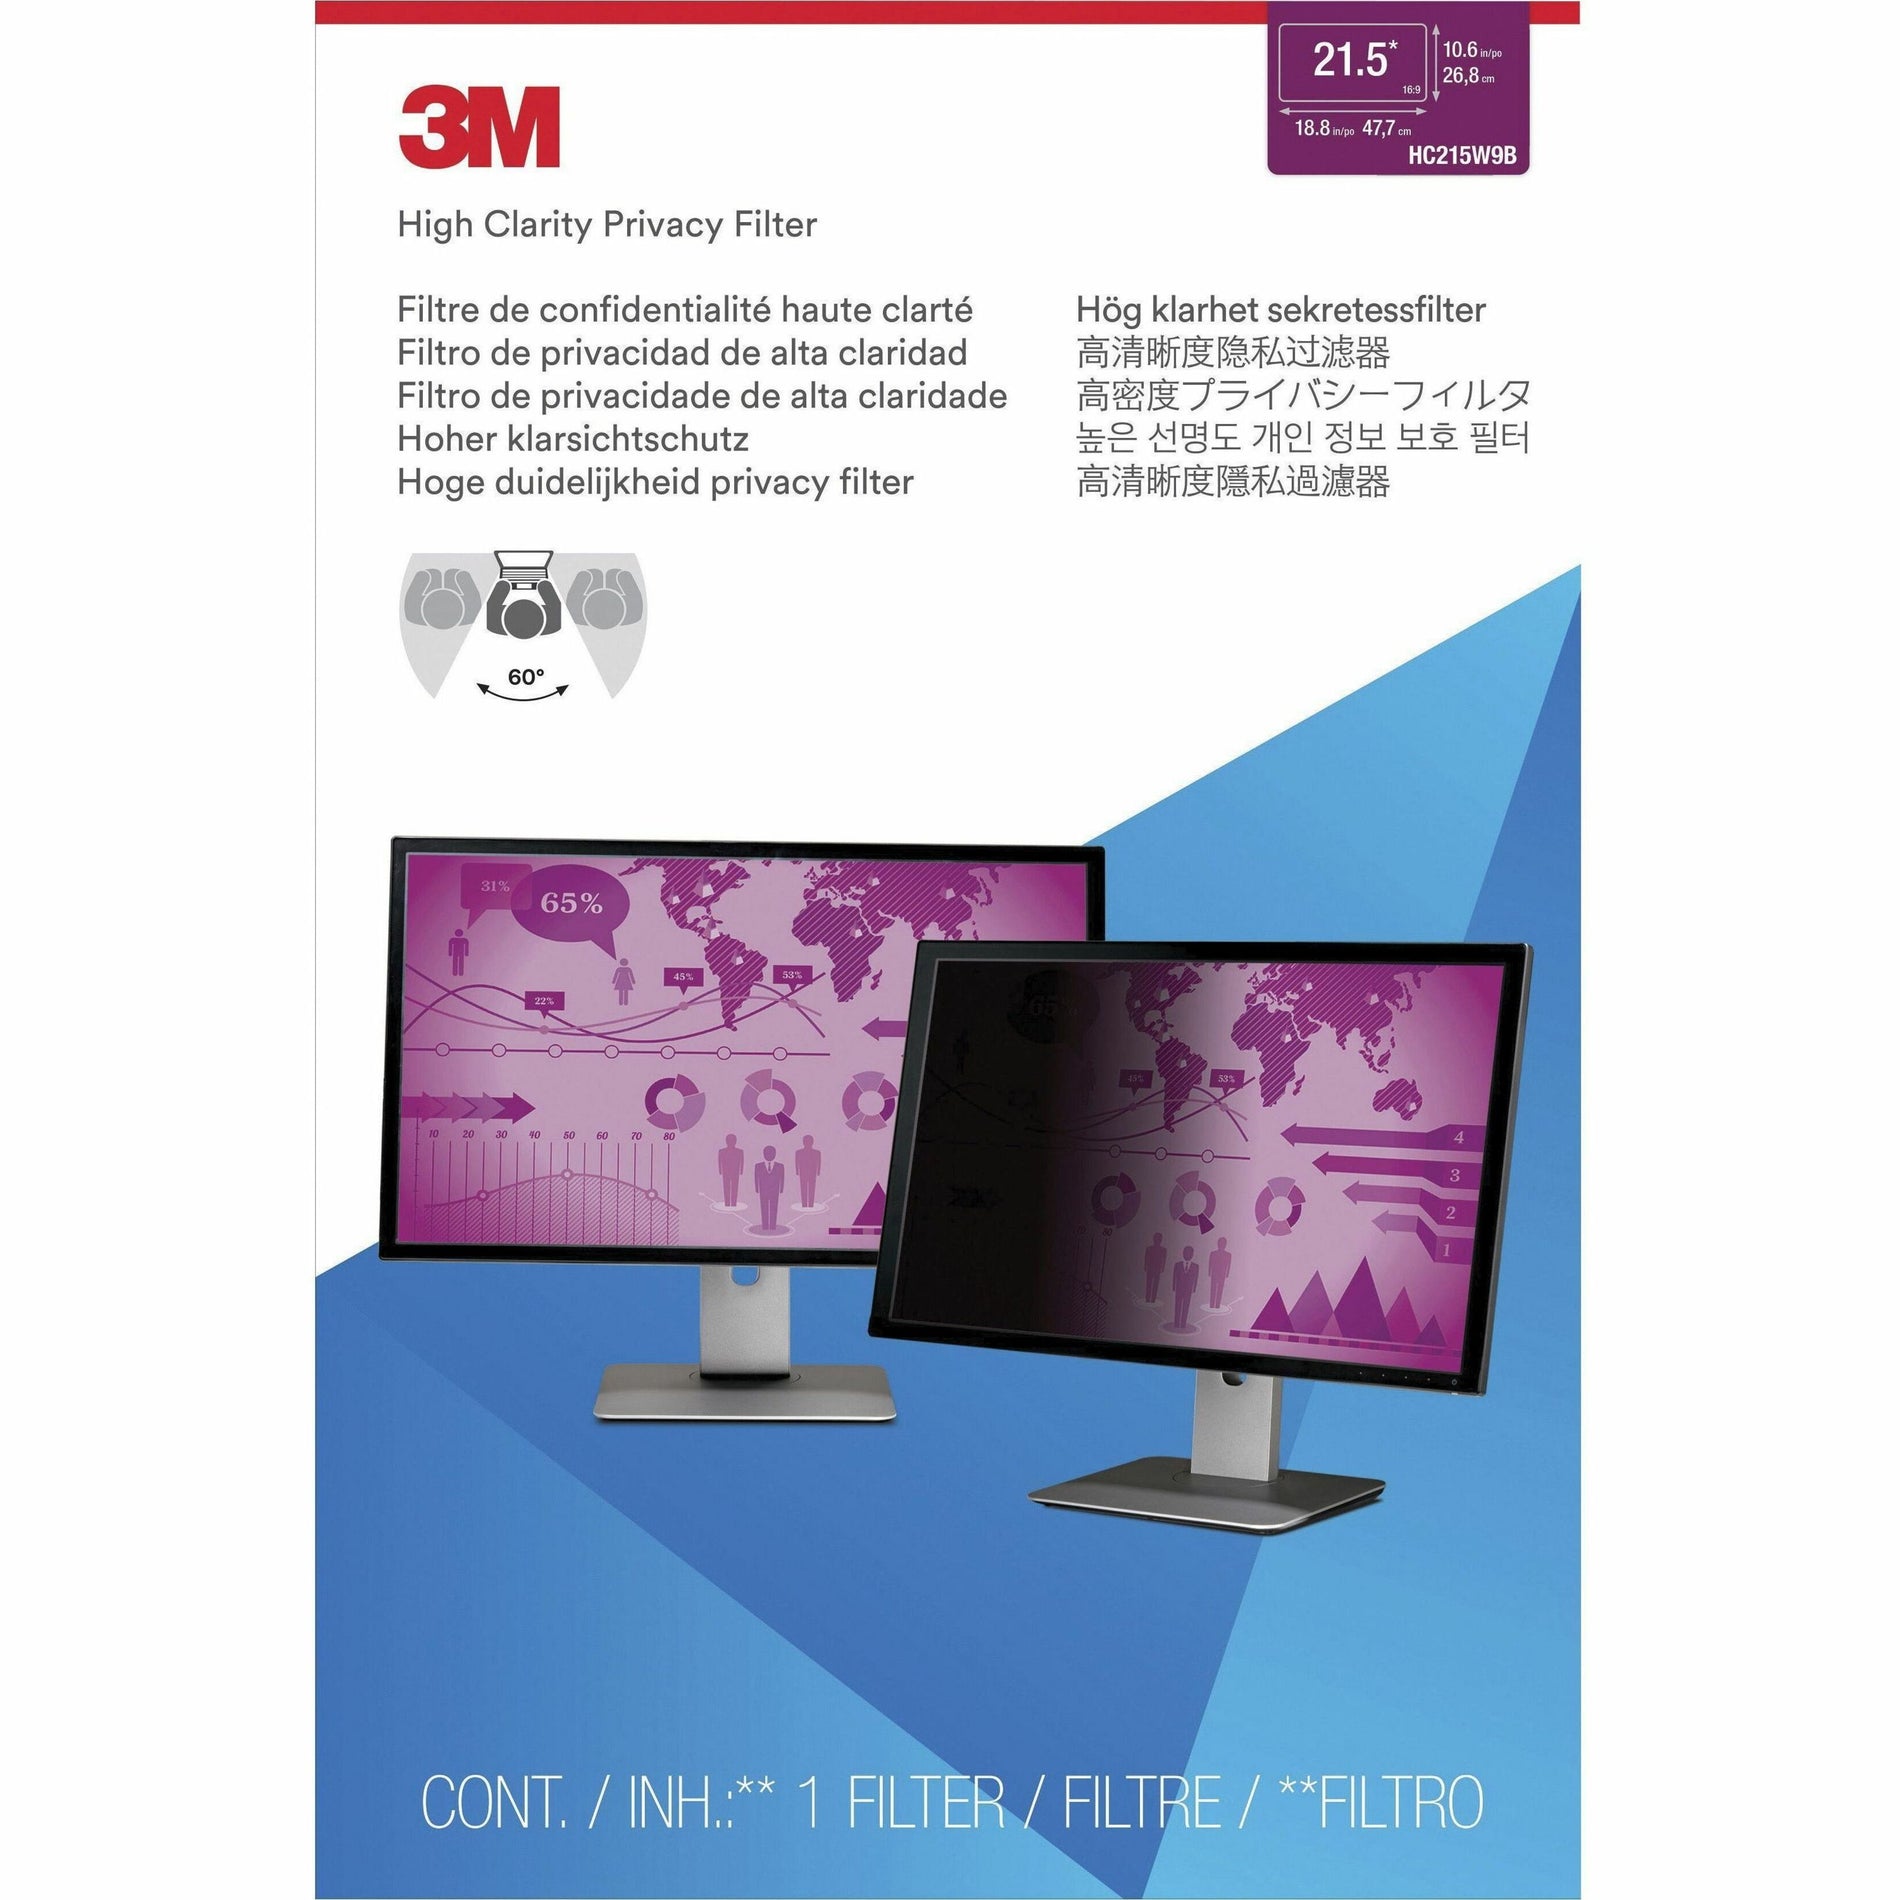 3M HC215W9B High Clarity Privacy Filter, 21.5" Widescreen Monitor, Easy to Apply, Easy to Remove, Blue Light Reduction, Limited Viewing Angle